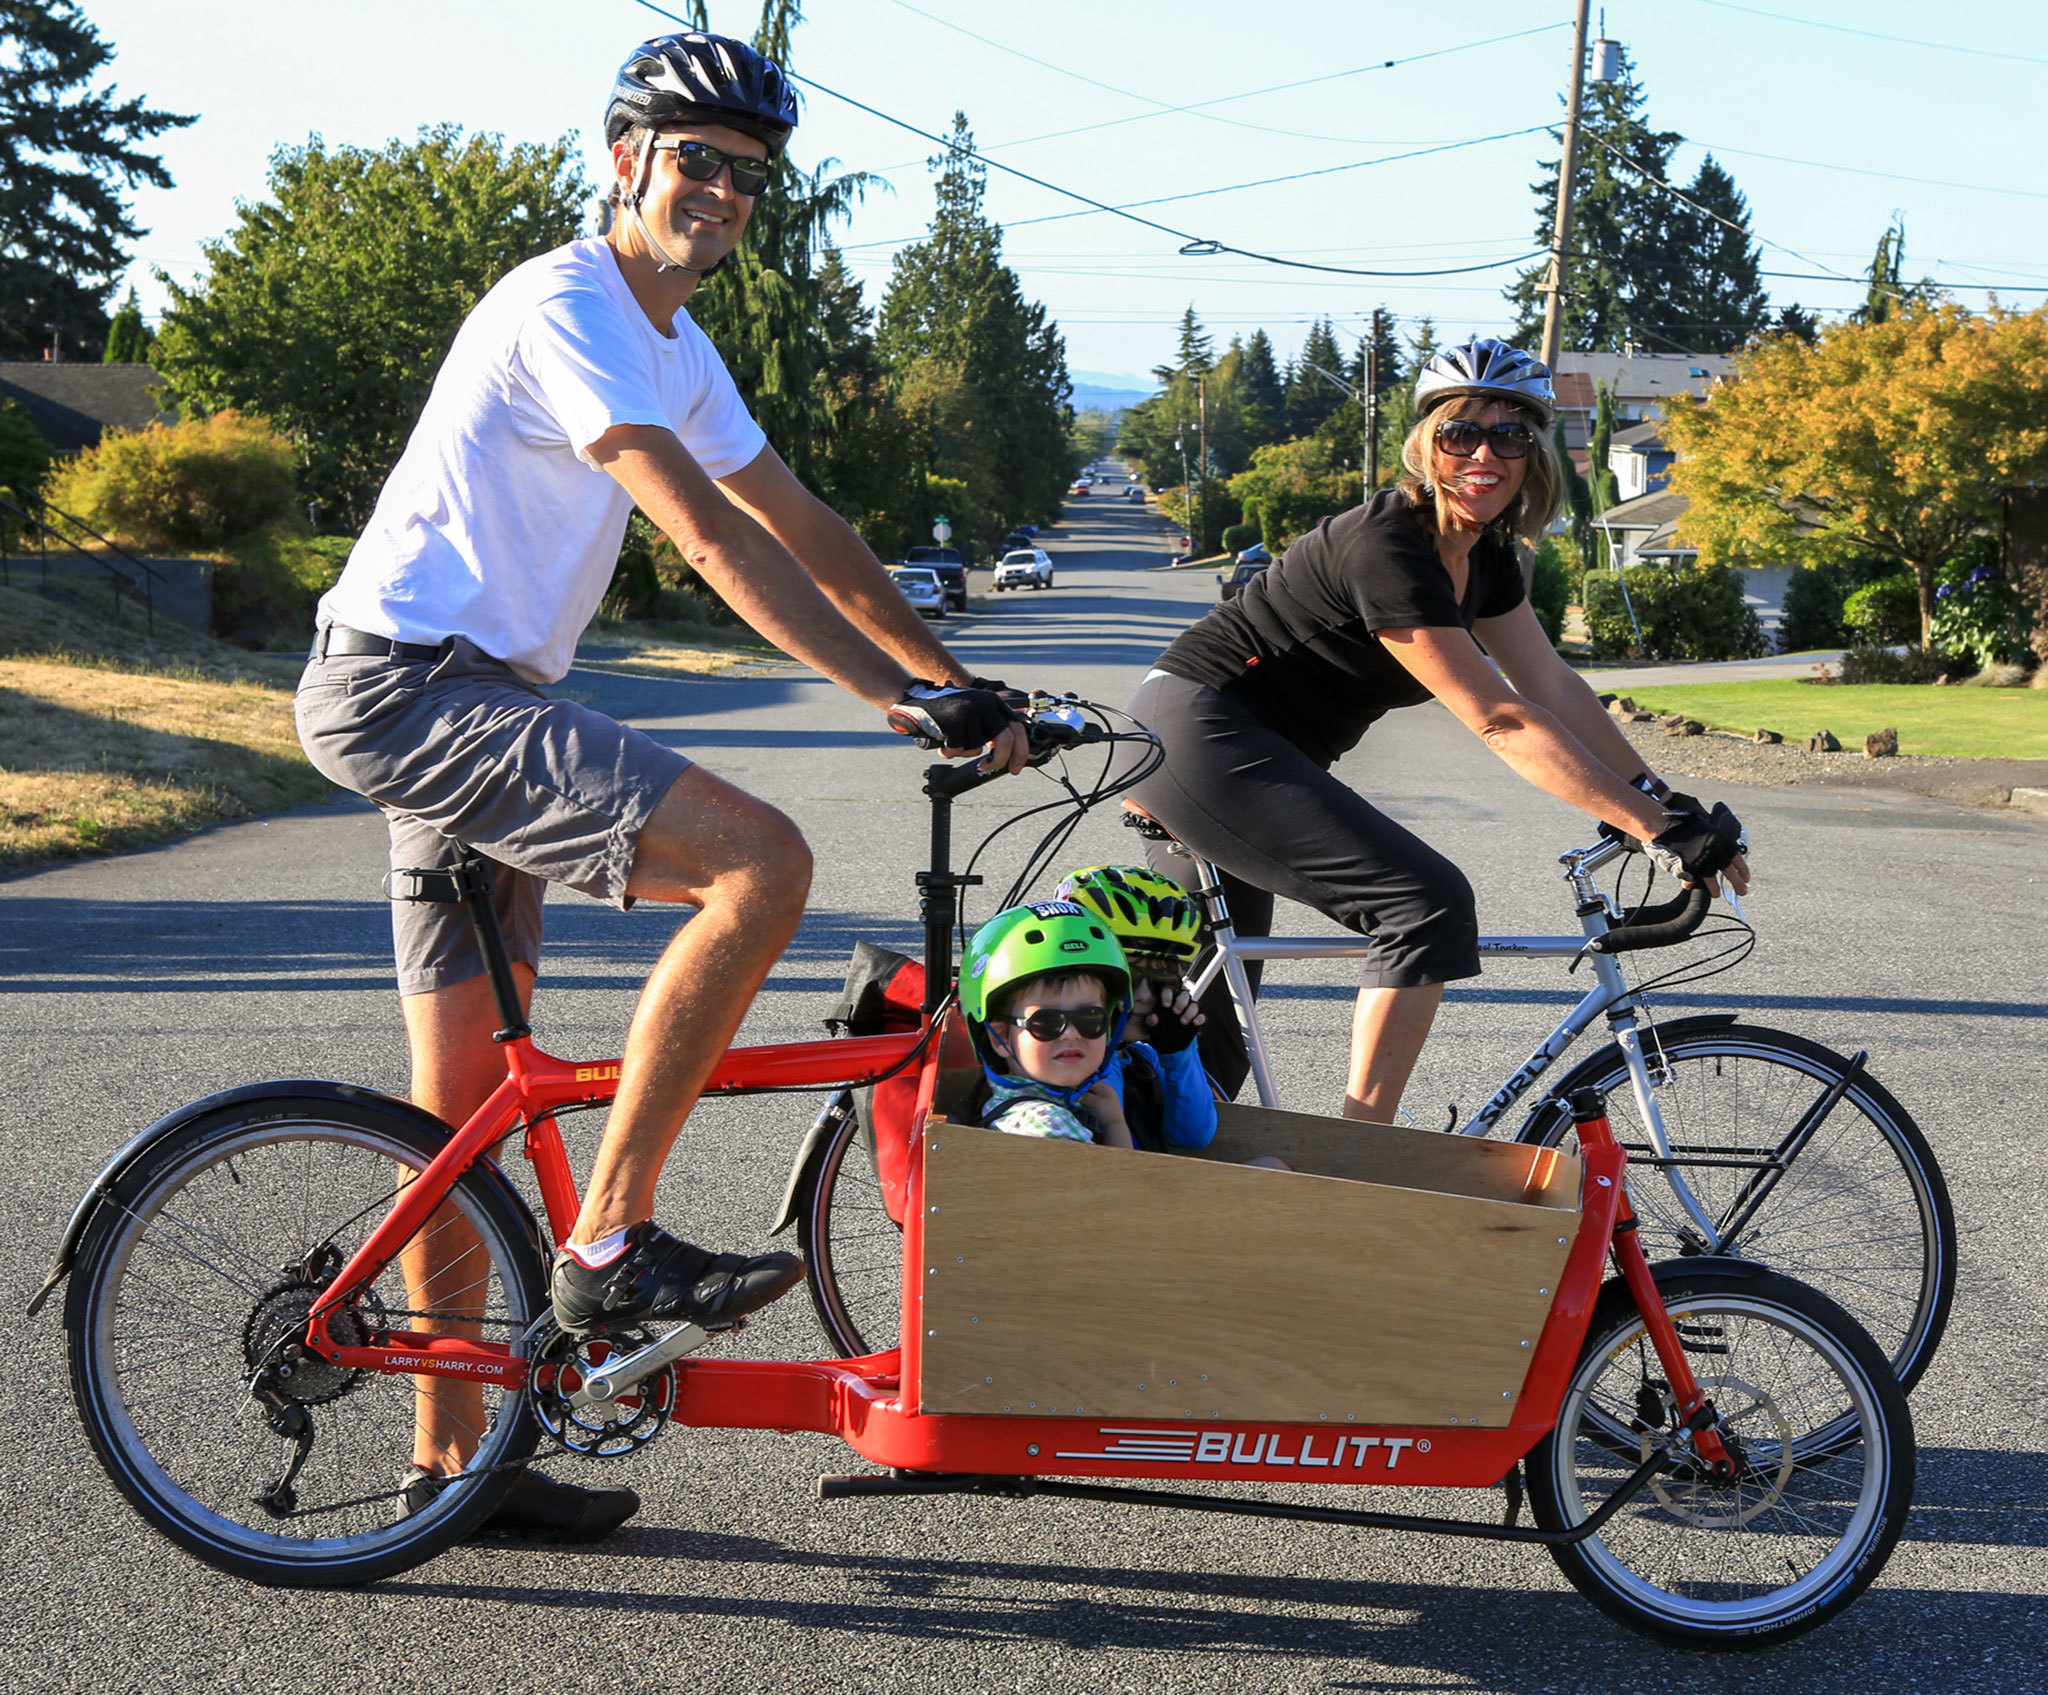 In this photo from last summer, Tyler and Brittney Rourke get ready to head out on a bike ride with sons Bryan and Reece. The family will help lead a tour of Everett’s fire stations on Saturday. (Herald file photo by Kevin Clark)